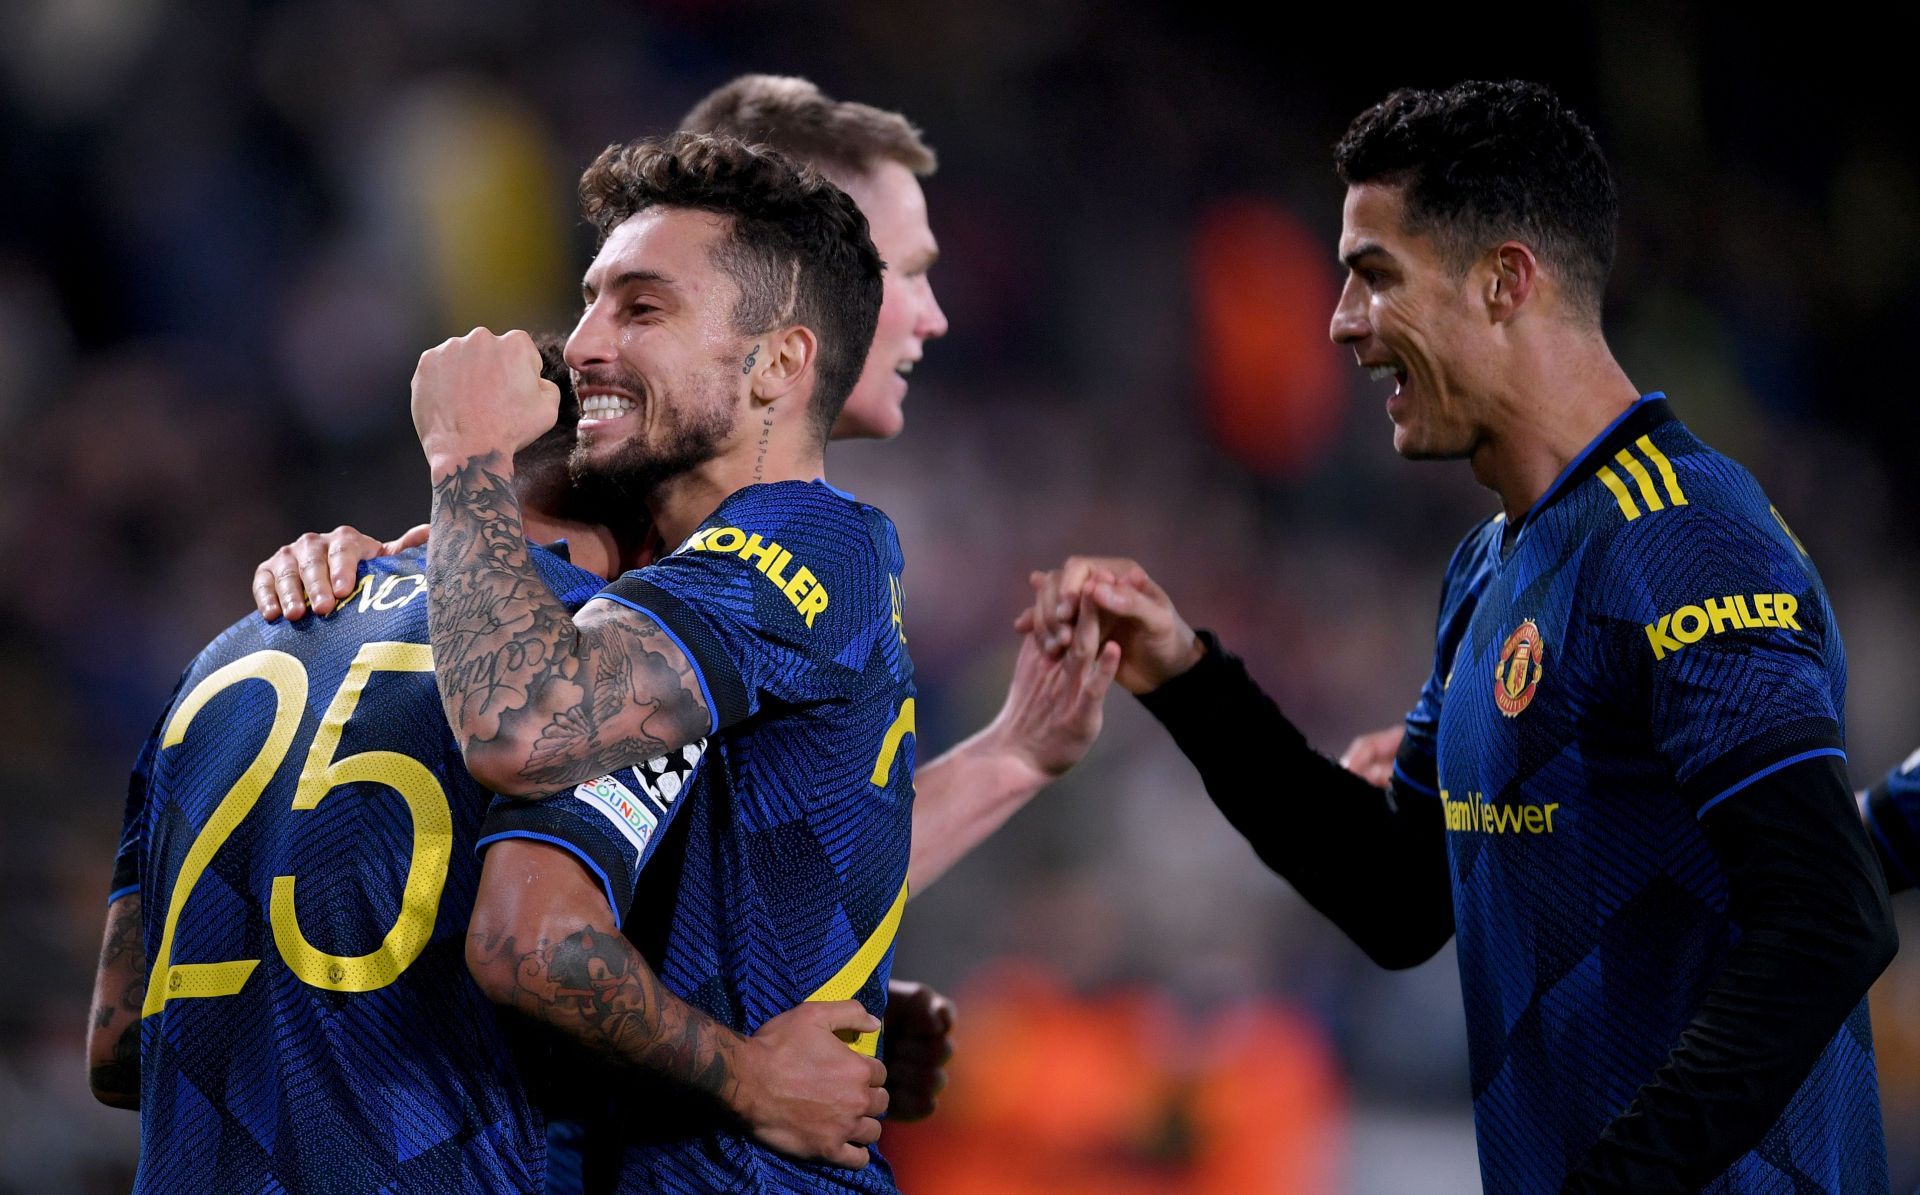 Manchester United picked up a crucial win over Villarreal in their Champions League clash.